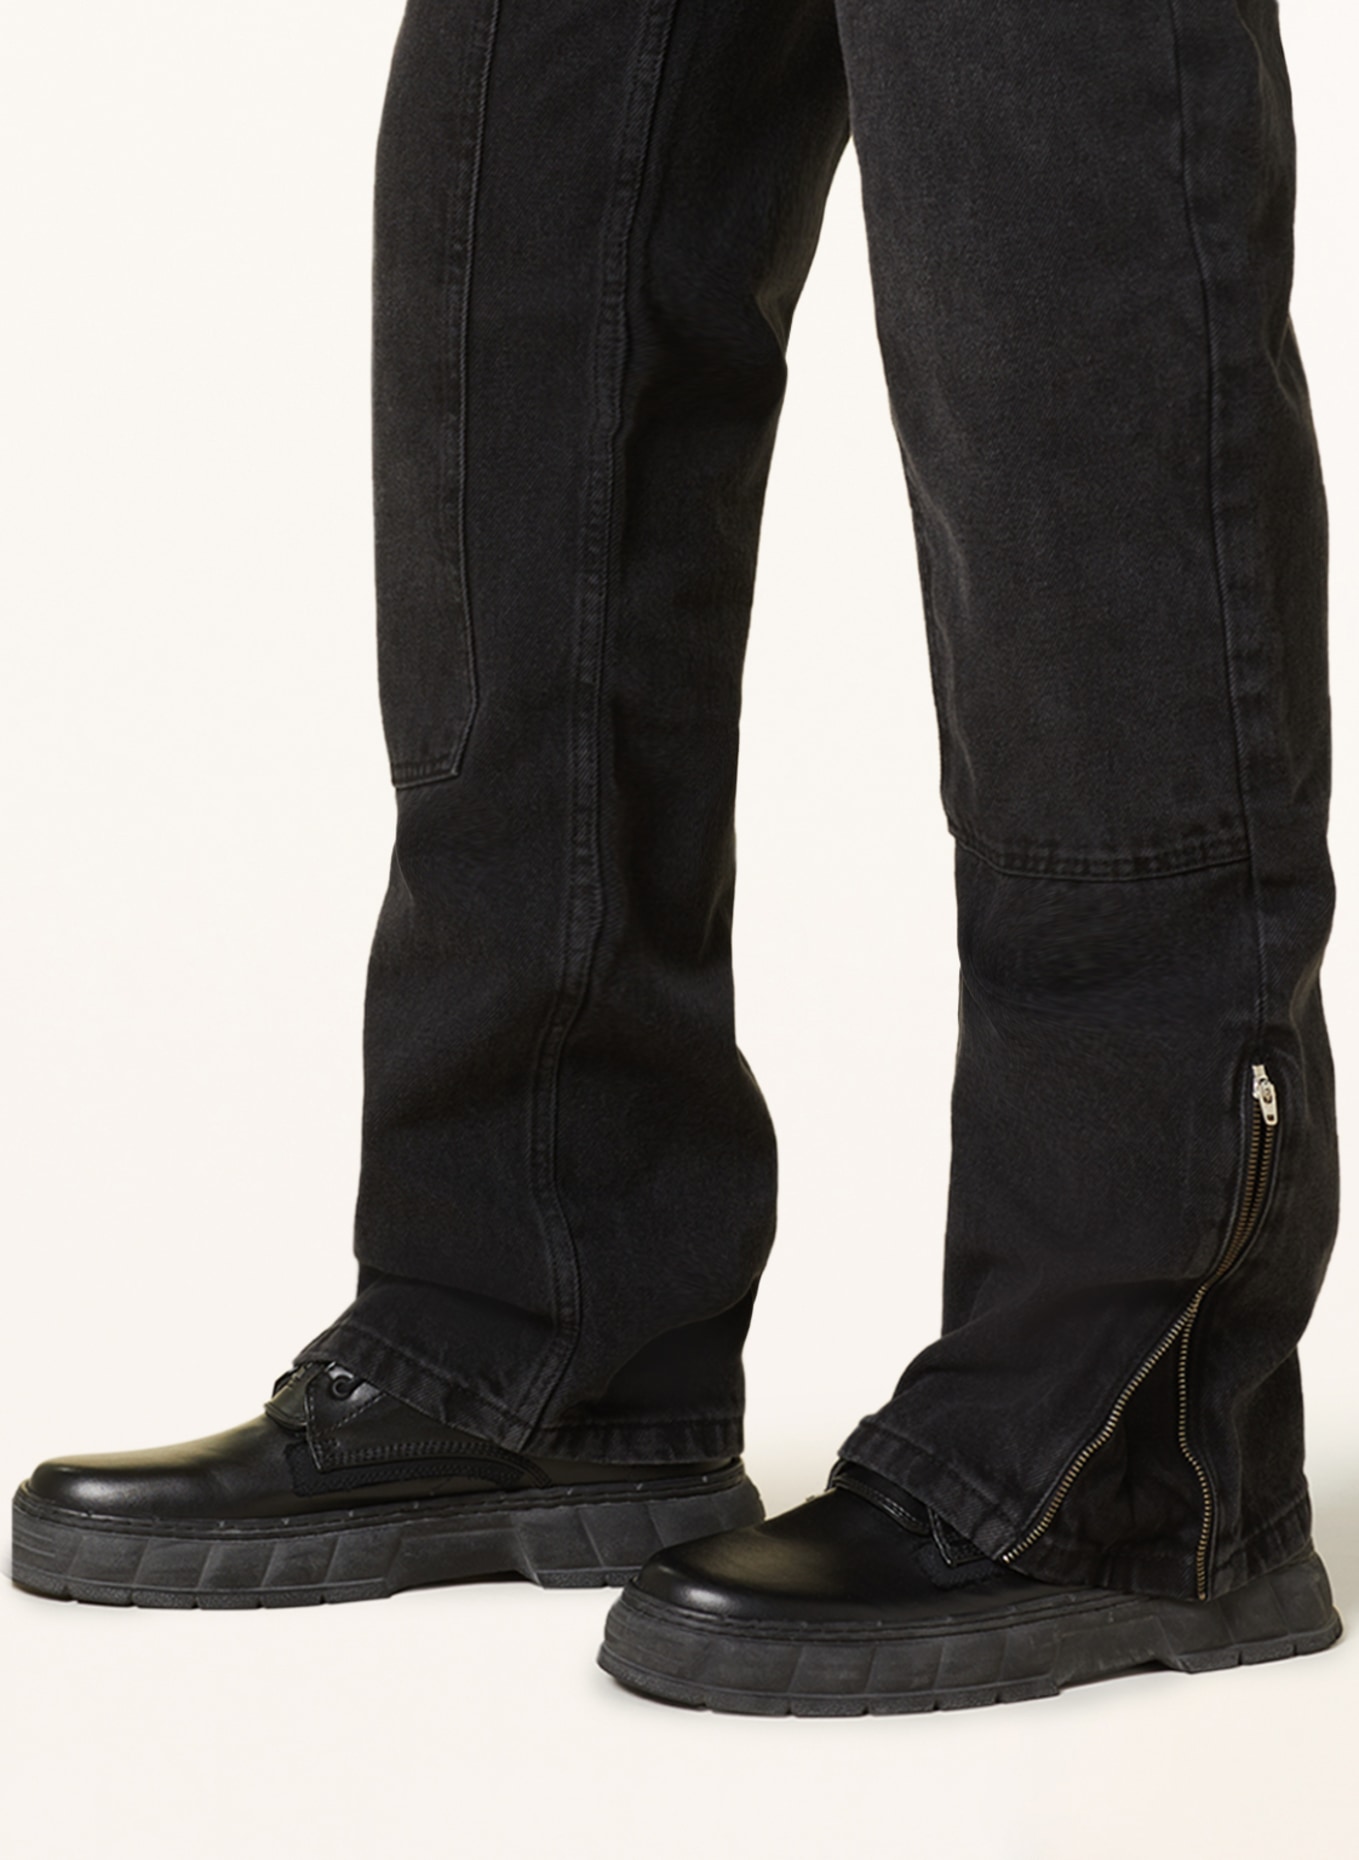 EIGHTYFIVE Jeans Straight Fit, Farbe: black washed (Bild 6)